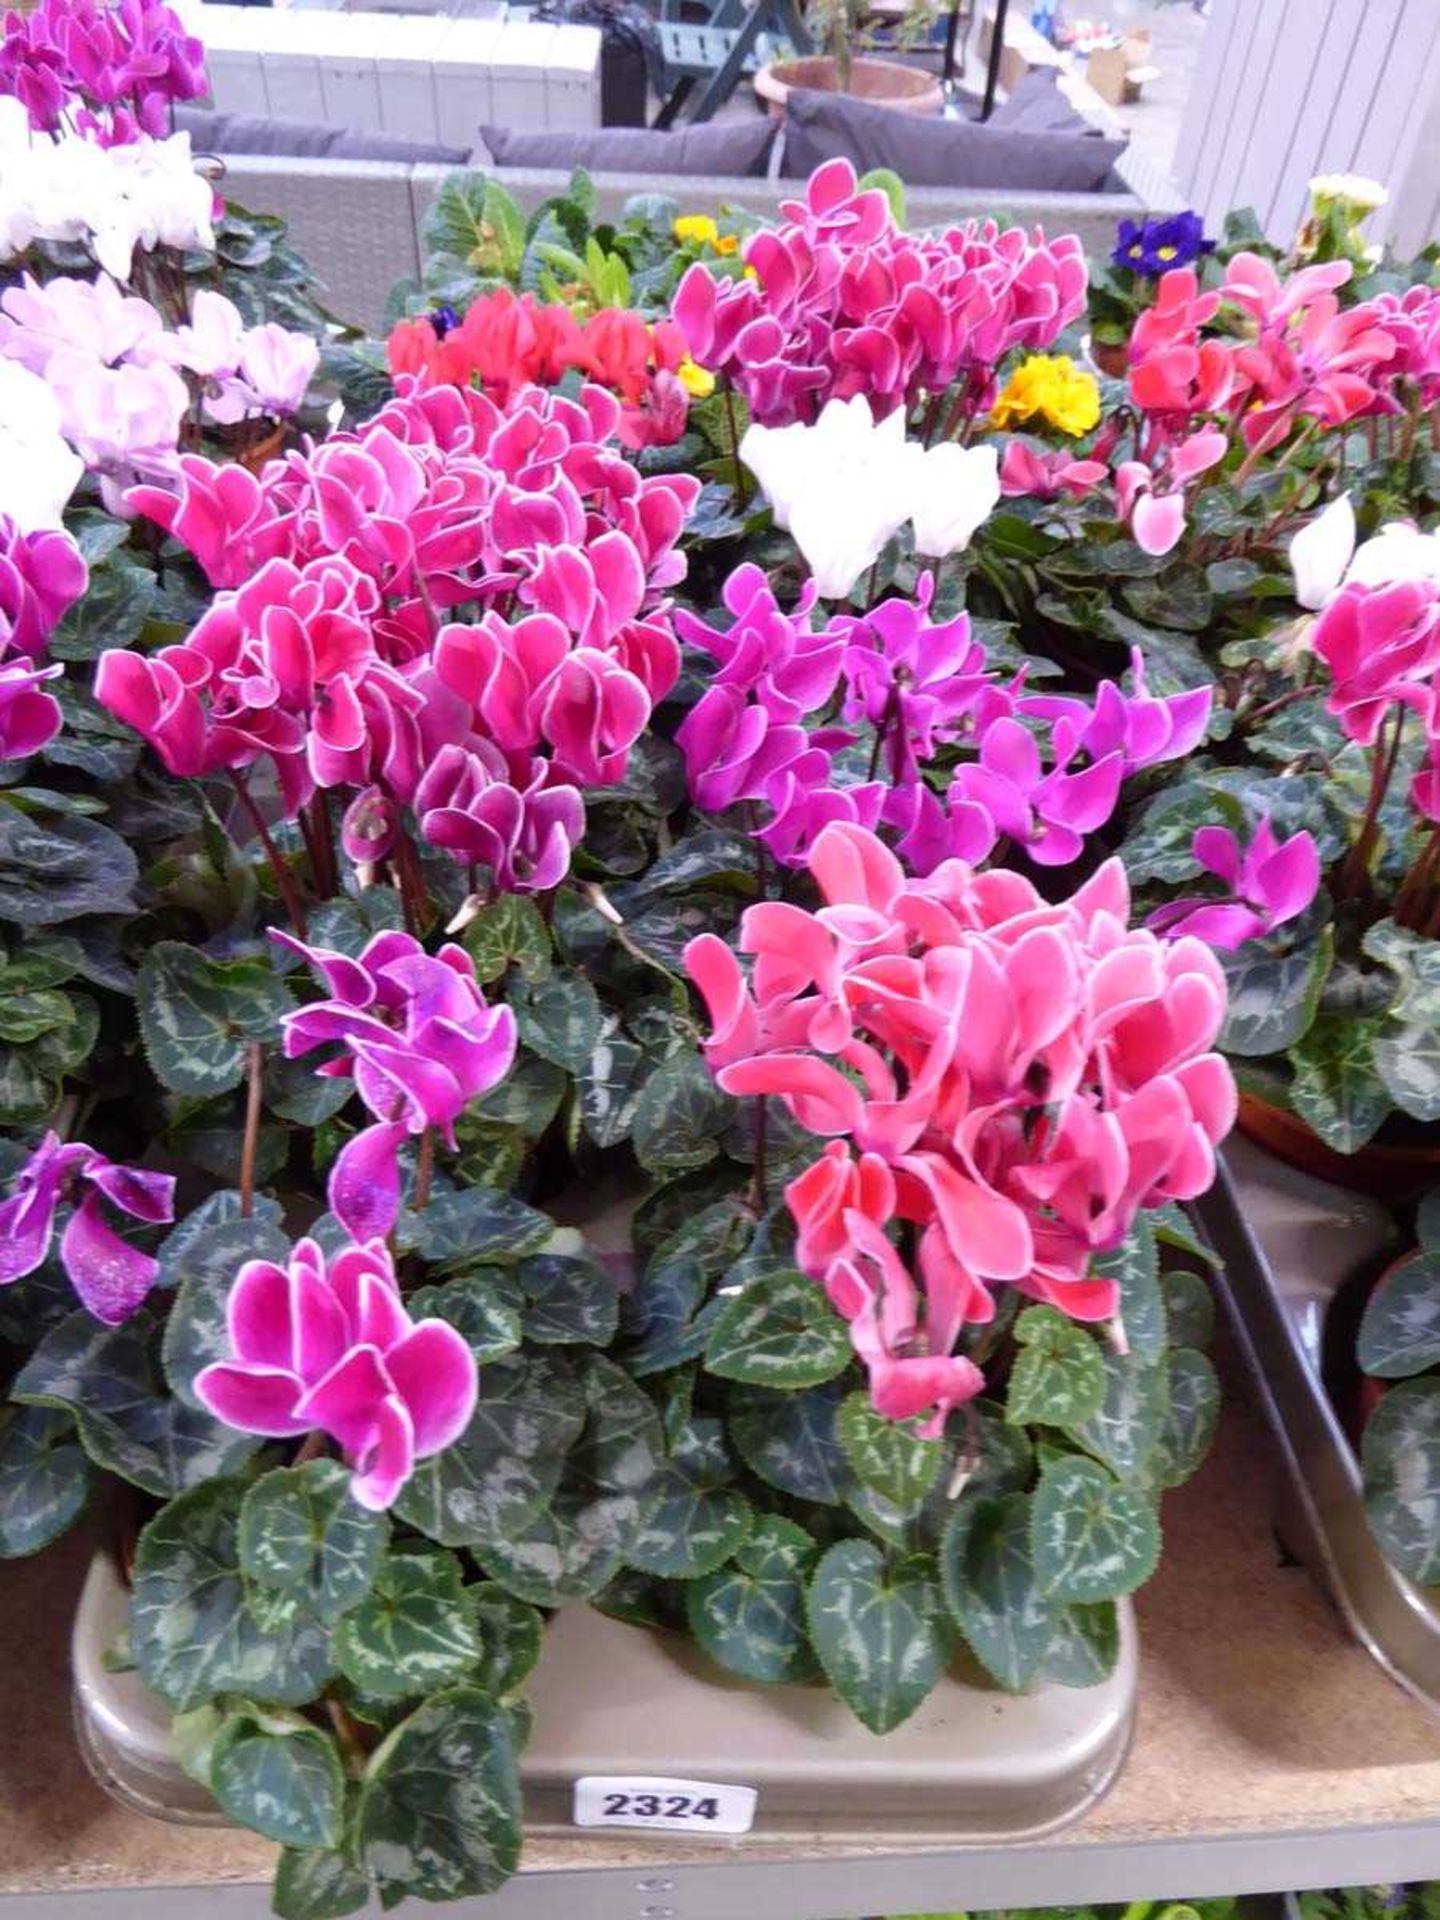 Large tray containing 8 large potted cyclamen